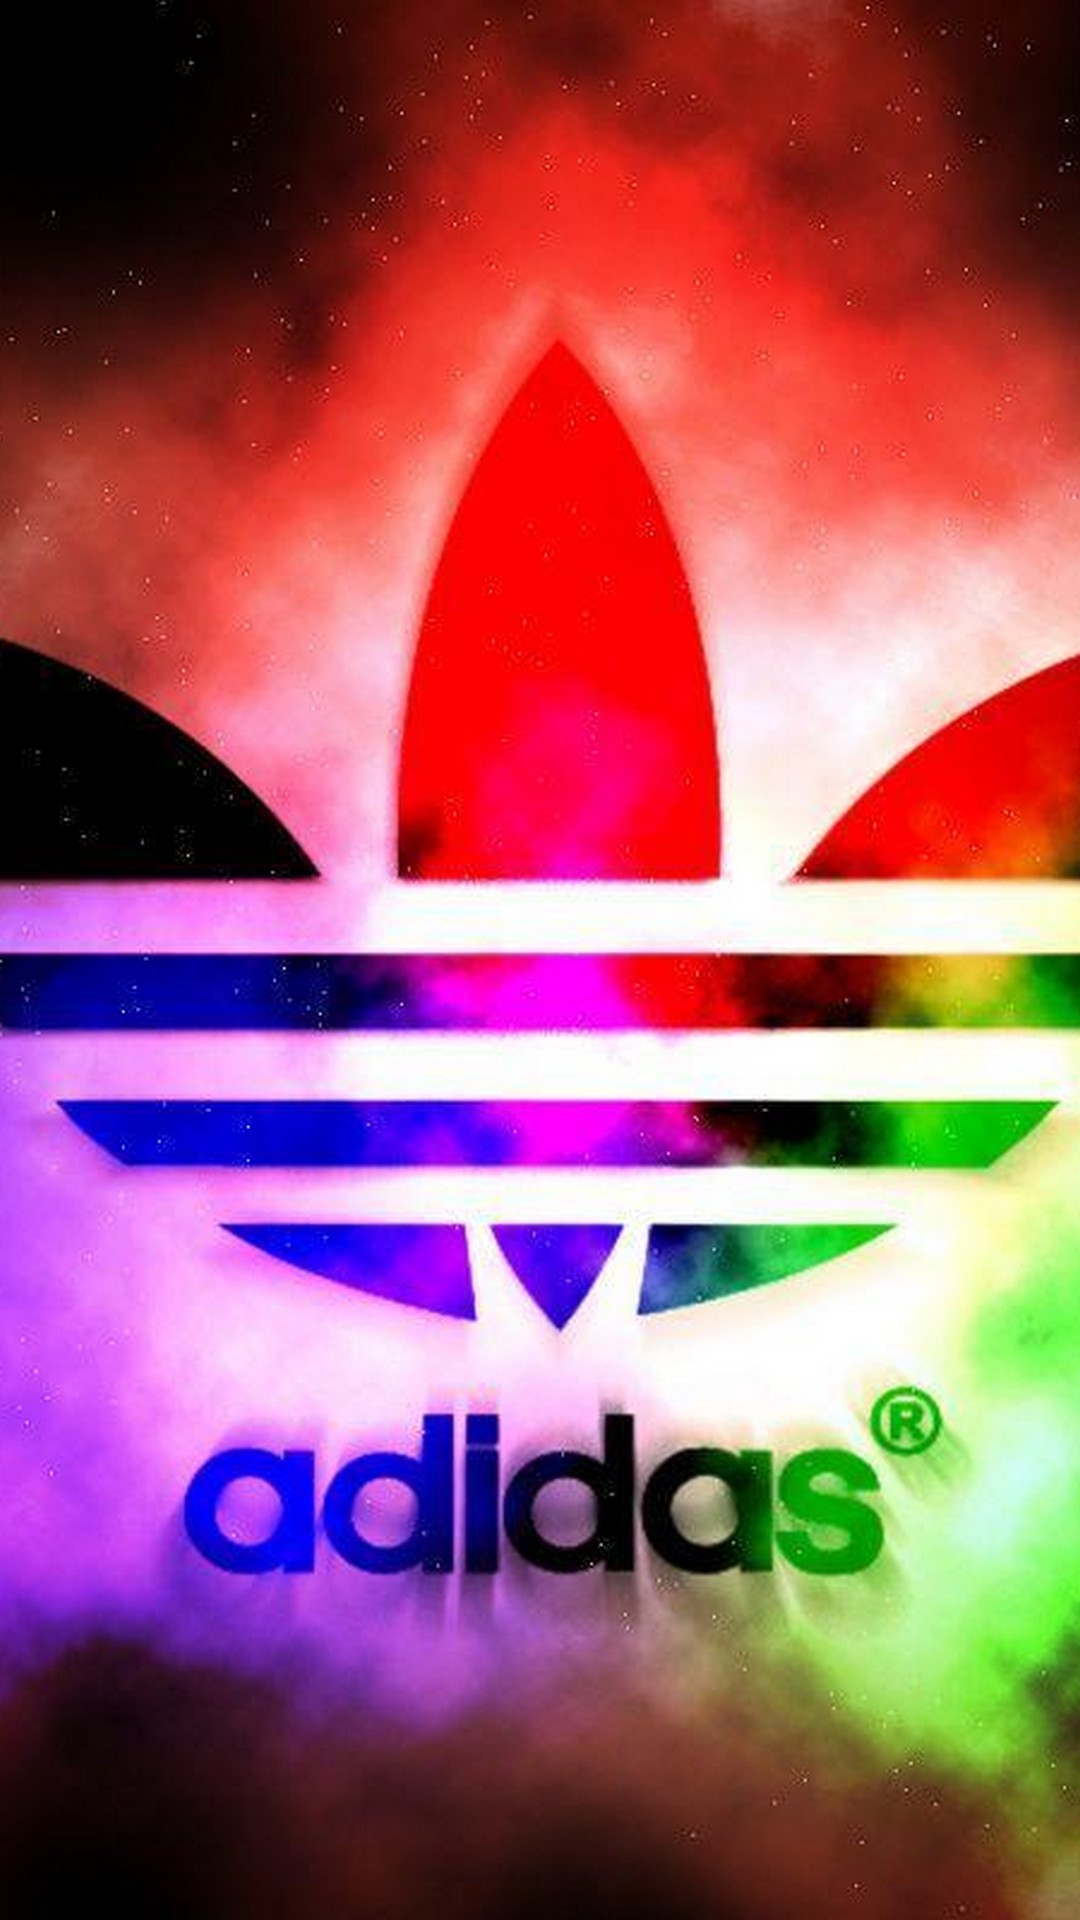 Android Wallpaper HD Adidas Logo with high-resolution 1080x1920 pixel. You can use this wallpaper for your Android backgrounds, Tablet, Samsung Screensavers, Mobile Phone Lock Screen and another Smartphones device